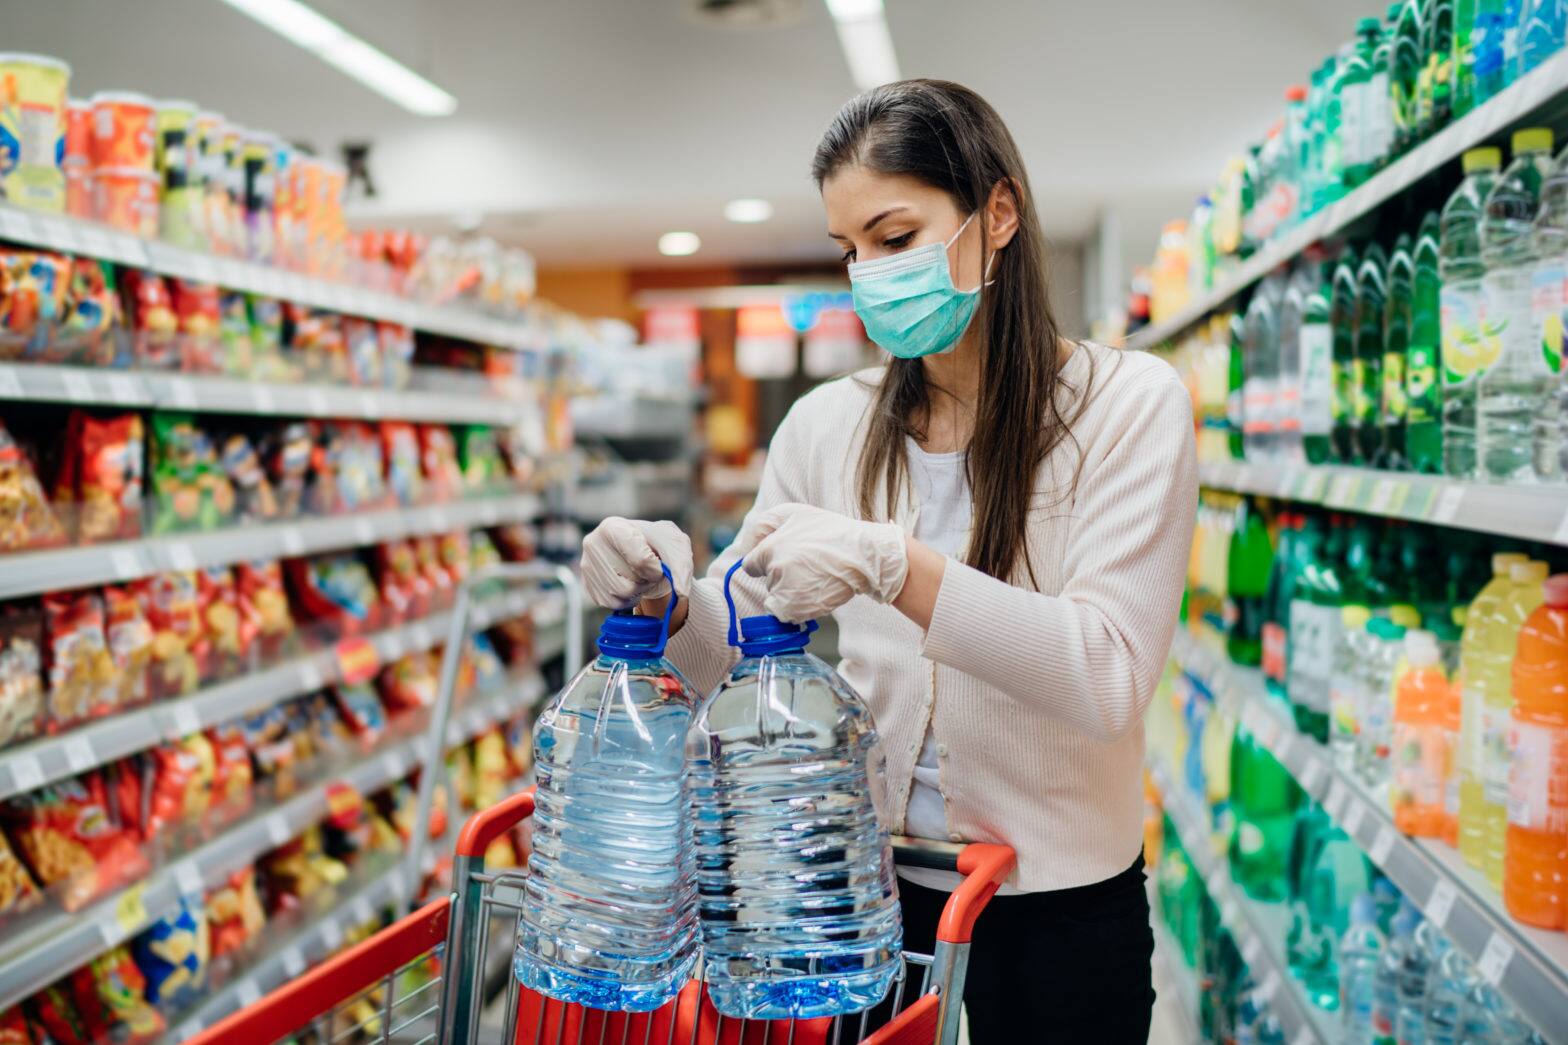 buyer wearing a protective mask during the pandemic emergency to buy